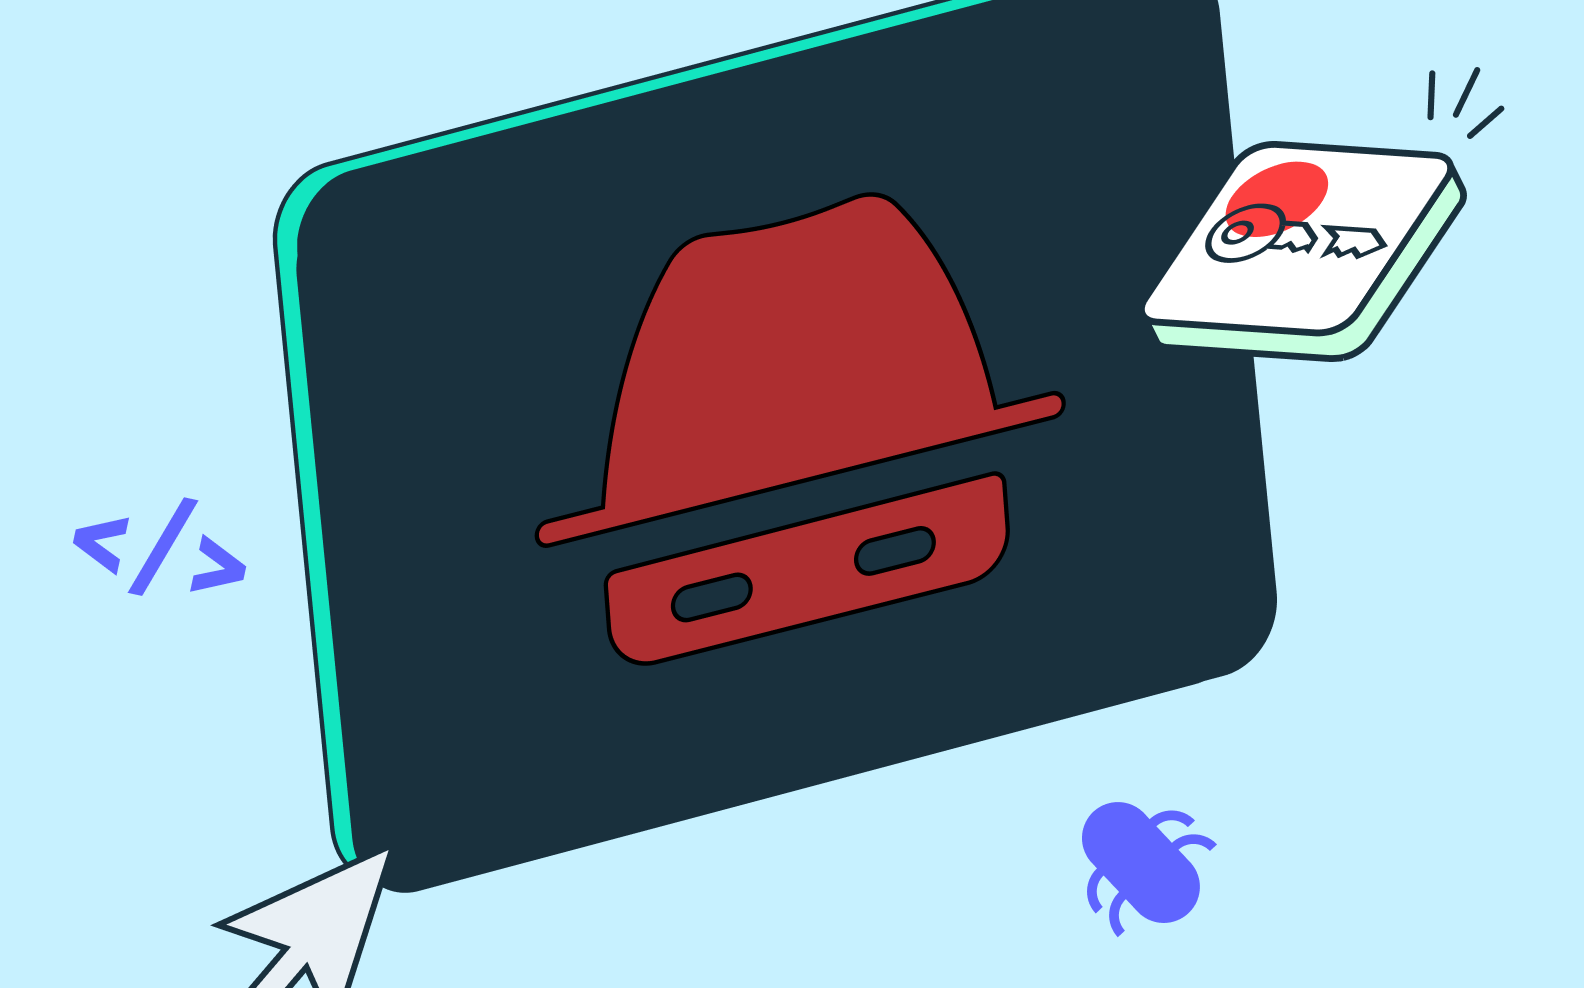 An abstracted illustration of a bot, portrayed all in red with a little red hat